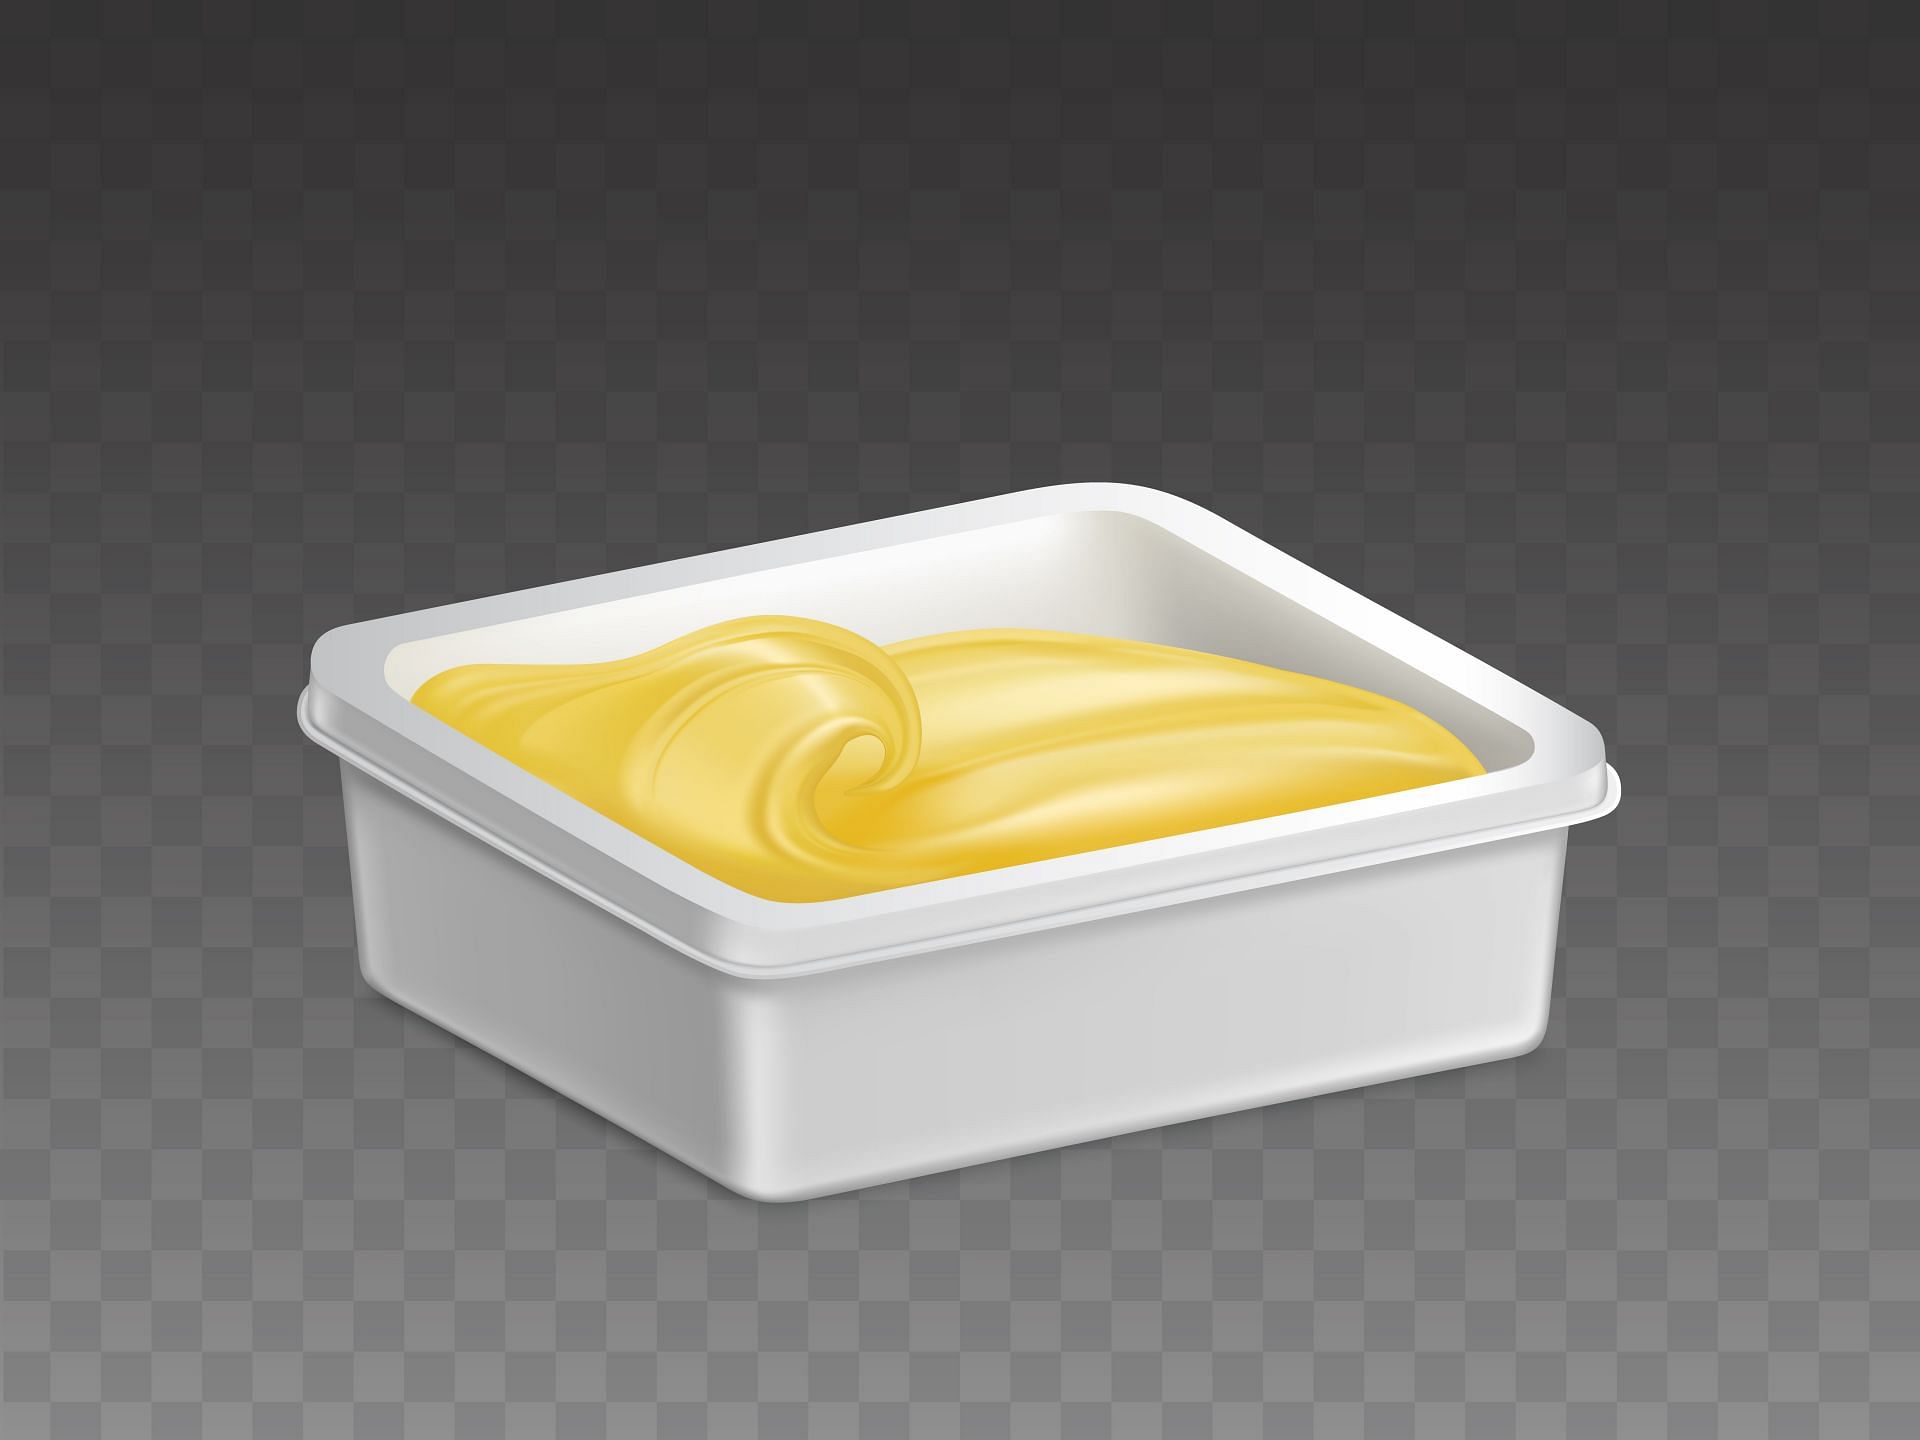 The advantages and disadvantages of Margarine (Image by vectorpocket on Freepik)